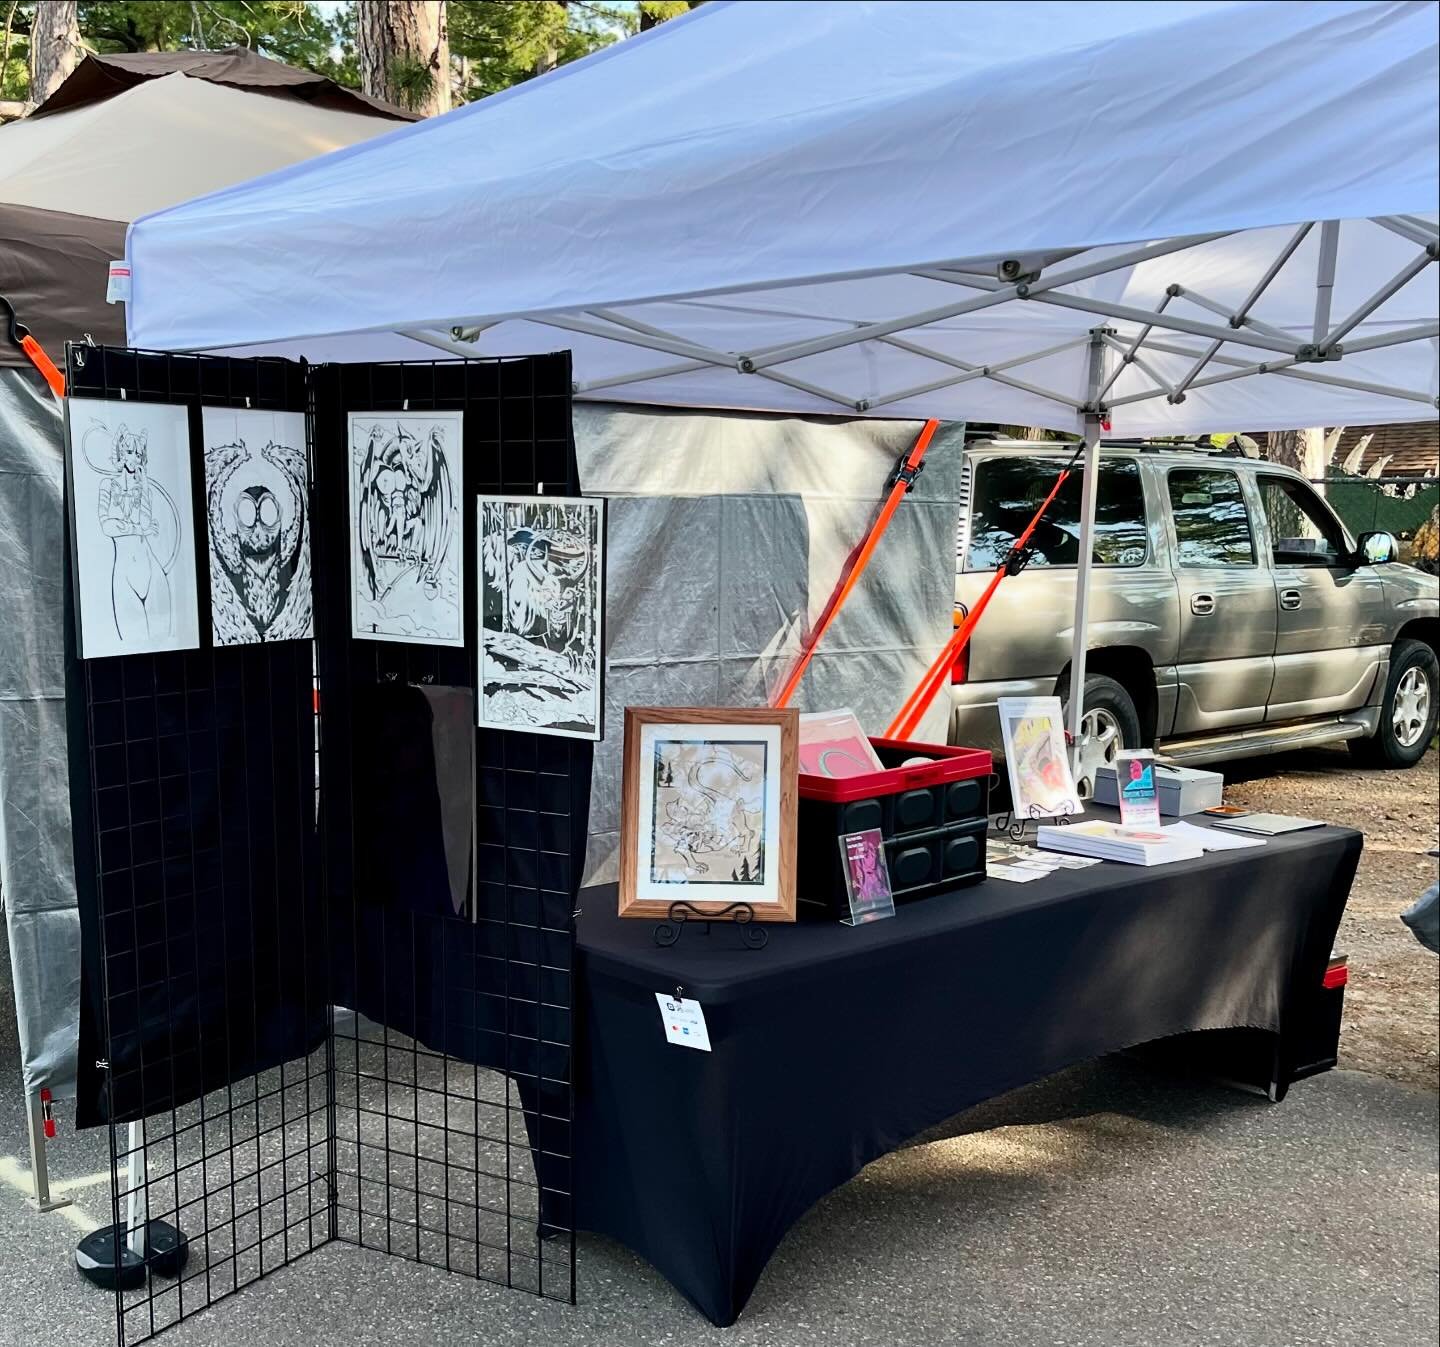 We are set up and ready to rock at #hodag Heritage Festival! Drop by and check out our 24sq ft hodag chalk piece!

#festival #art #artist #artistsoninstagram #artwork #convention #monster #cryptid #rhinelander #wisconsin #cryptozoology #characterart 